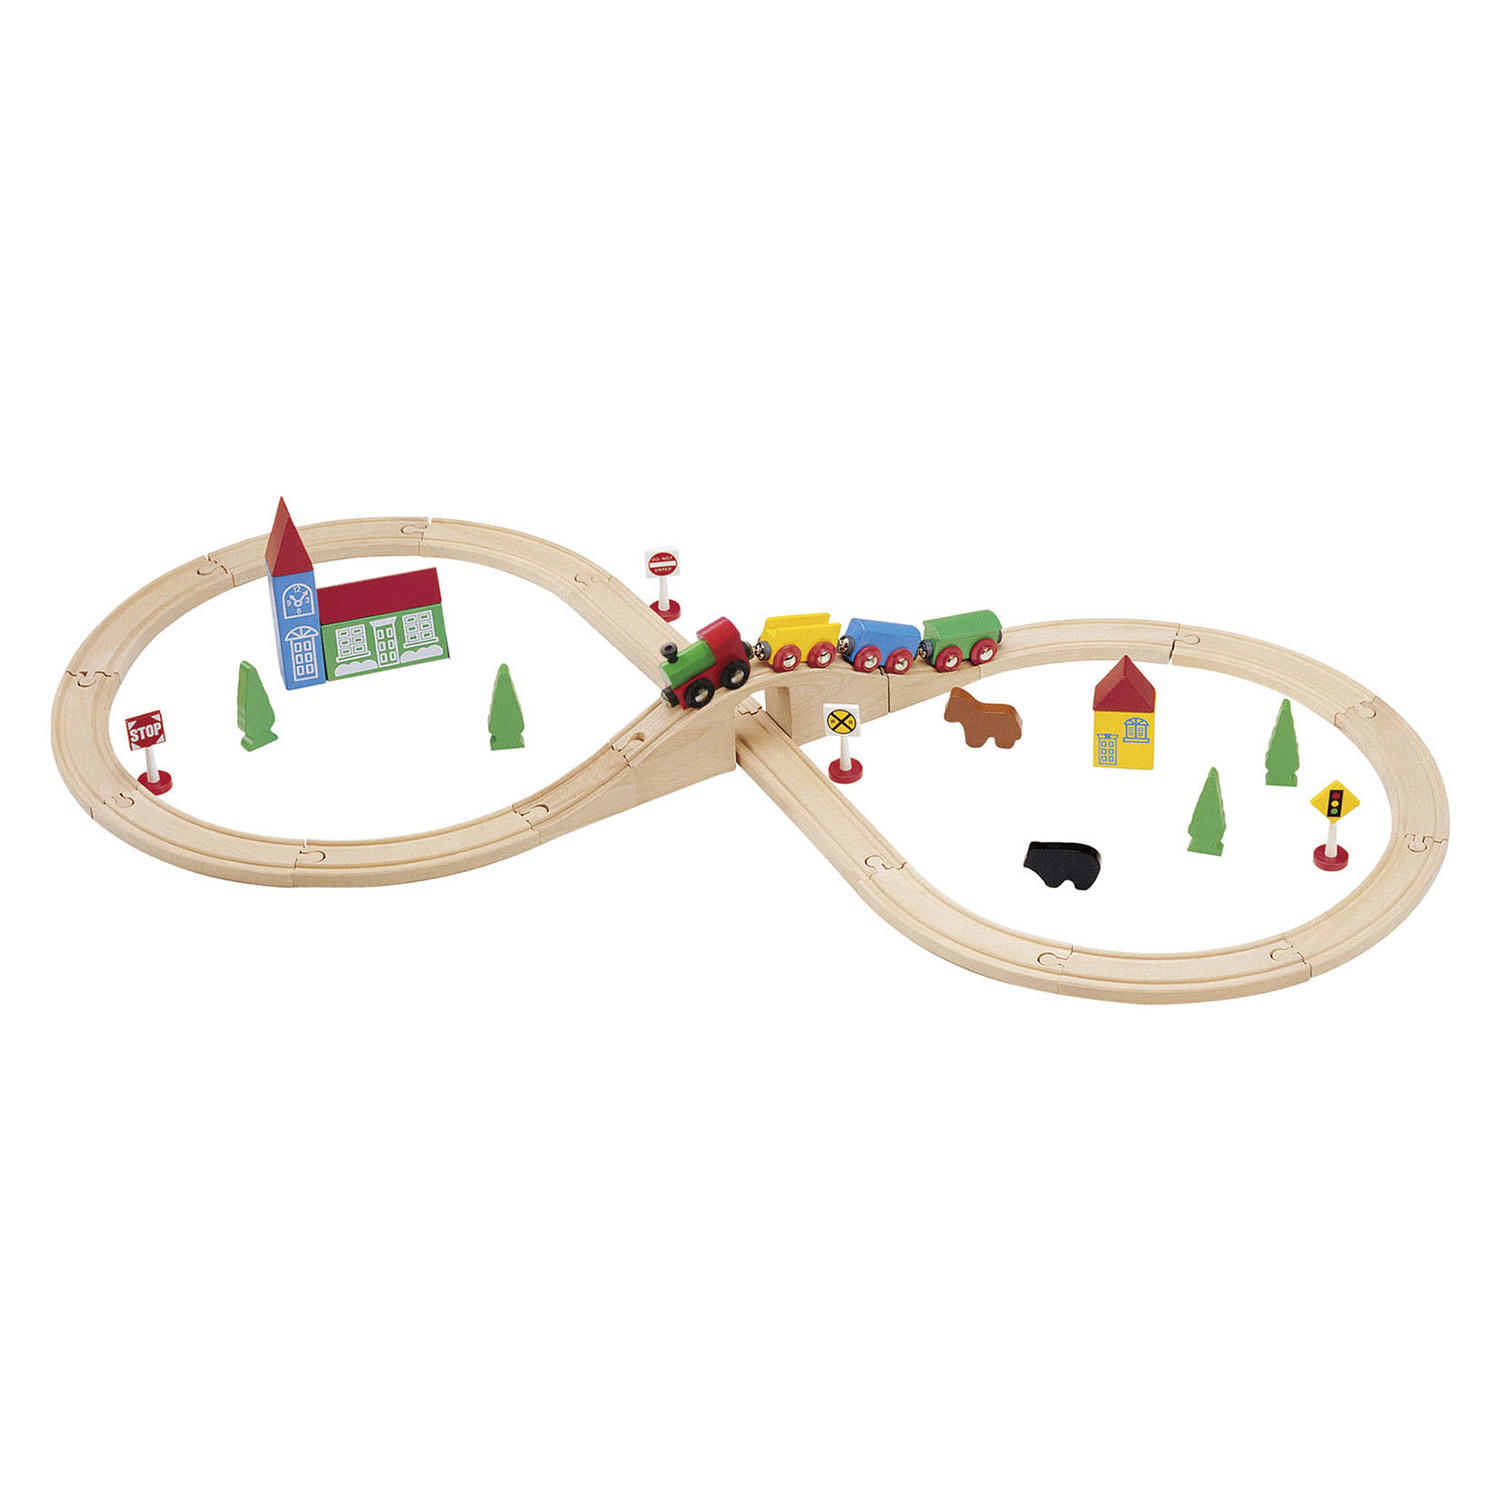 Maxim Enterprise Figure 8 Wooden Train Set Toy – Big 37 Pieces, Quality Hardwoods, Magnets Connect Cars, Complete Track, Fits on Table, Compatible with Thomas & Friends, BRIO, Melissa Doug